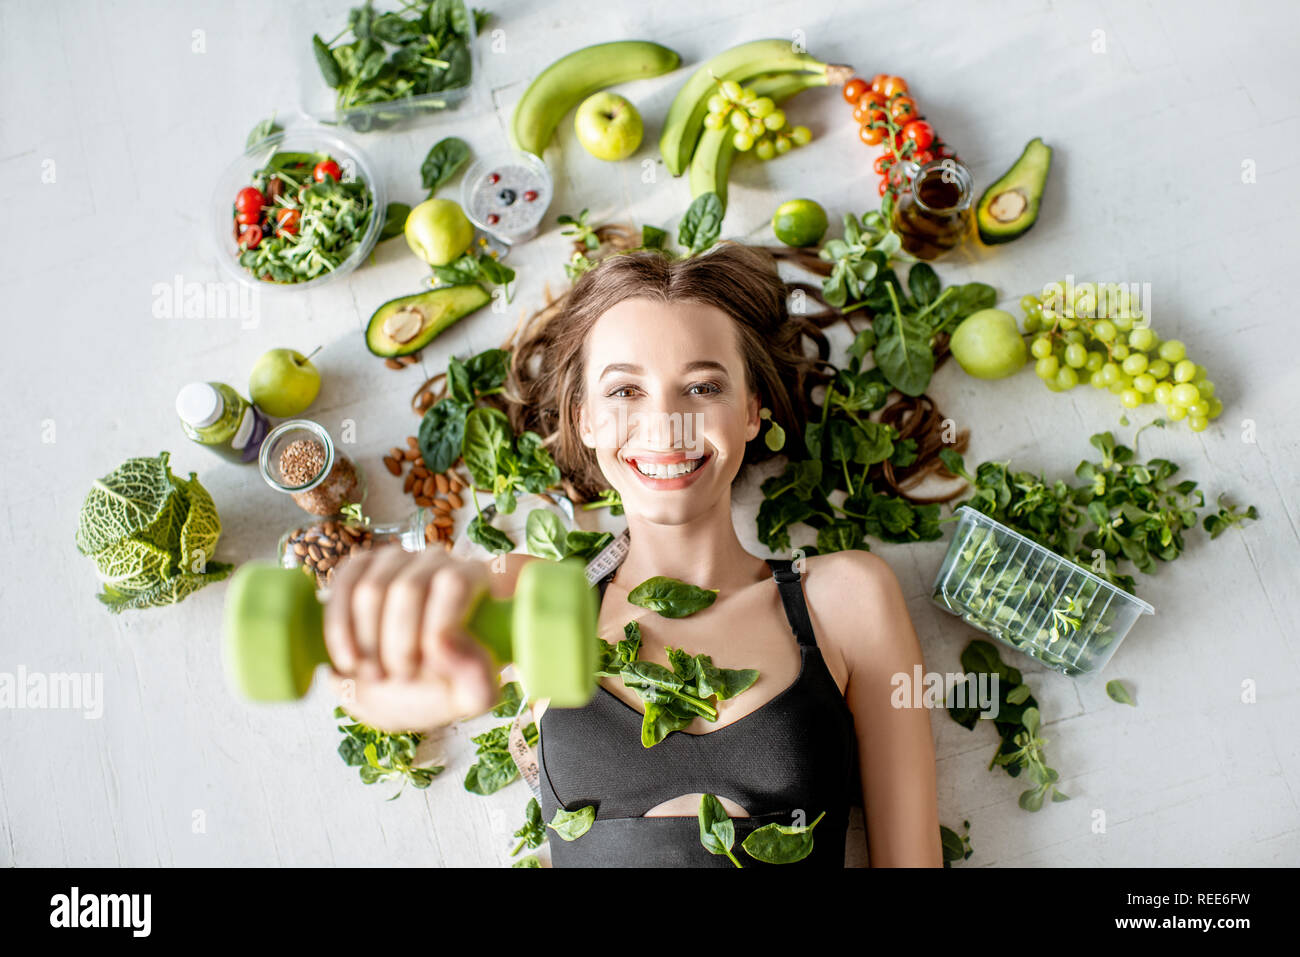 Beauty portrait of a sports woman surrounded by various healthy food lying on the floor. Healthy eating and sports lifestyle concept Stock Photo